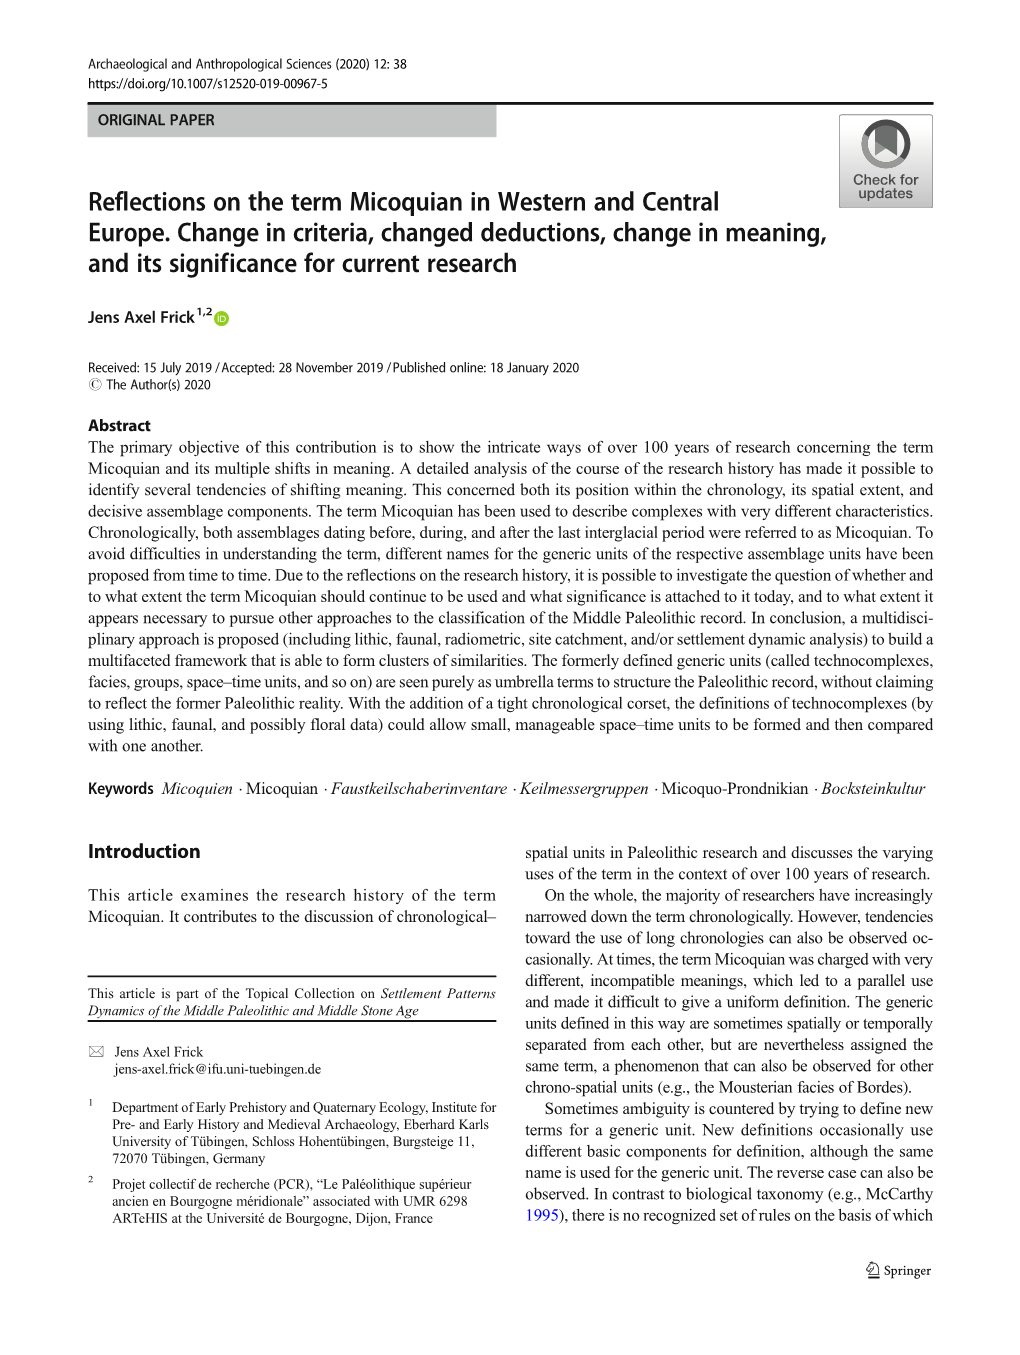 Reflections on the Term Micoquian in Western and Central Europe. Change in Criteria, Changed Deductions, Change in Meaning, and Its Significance for Current Research